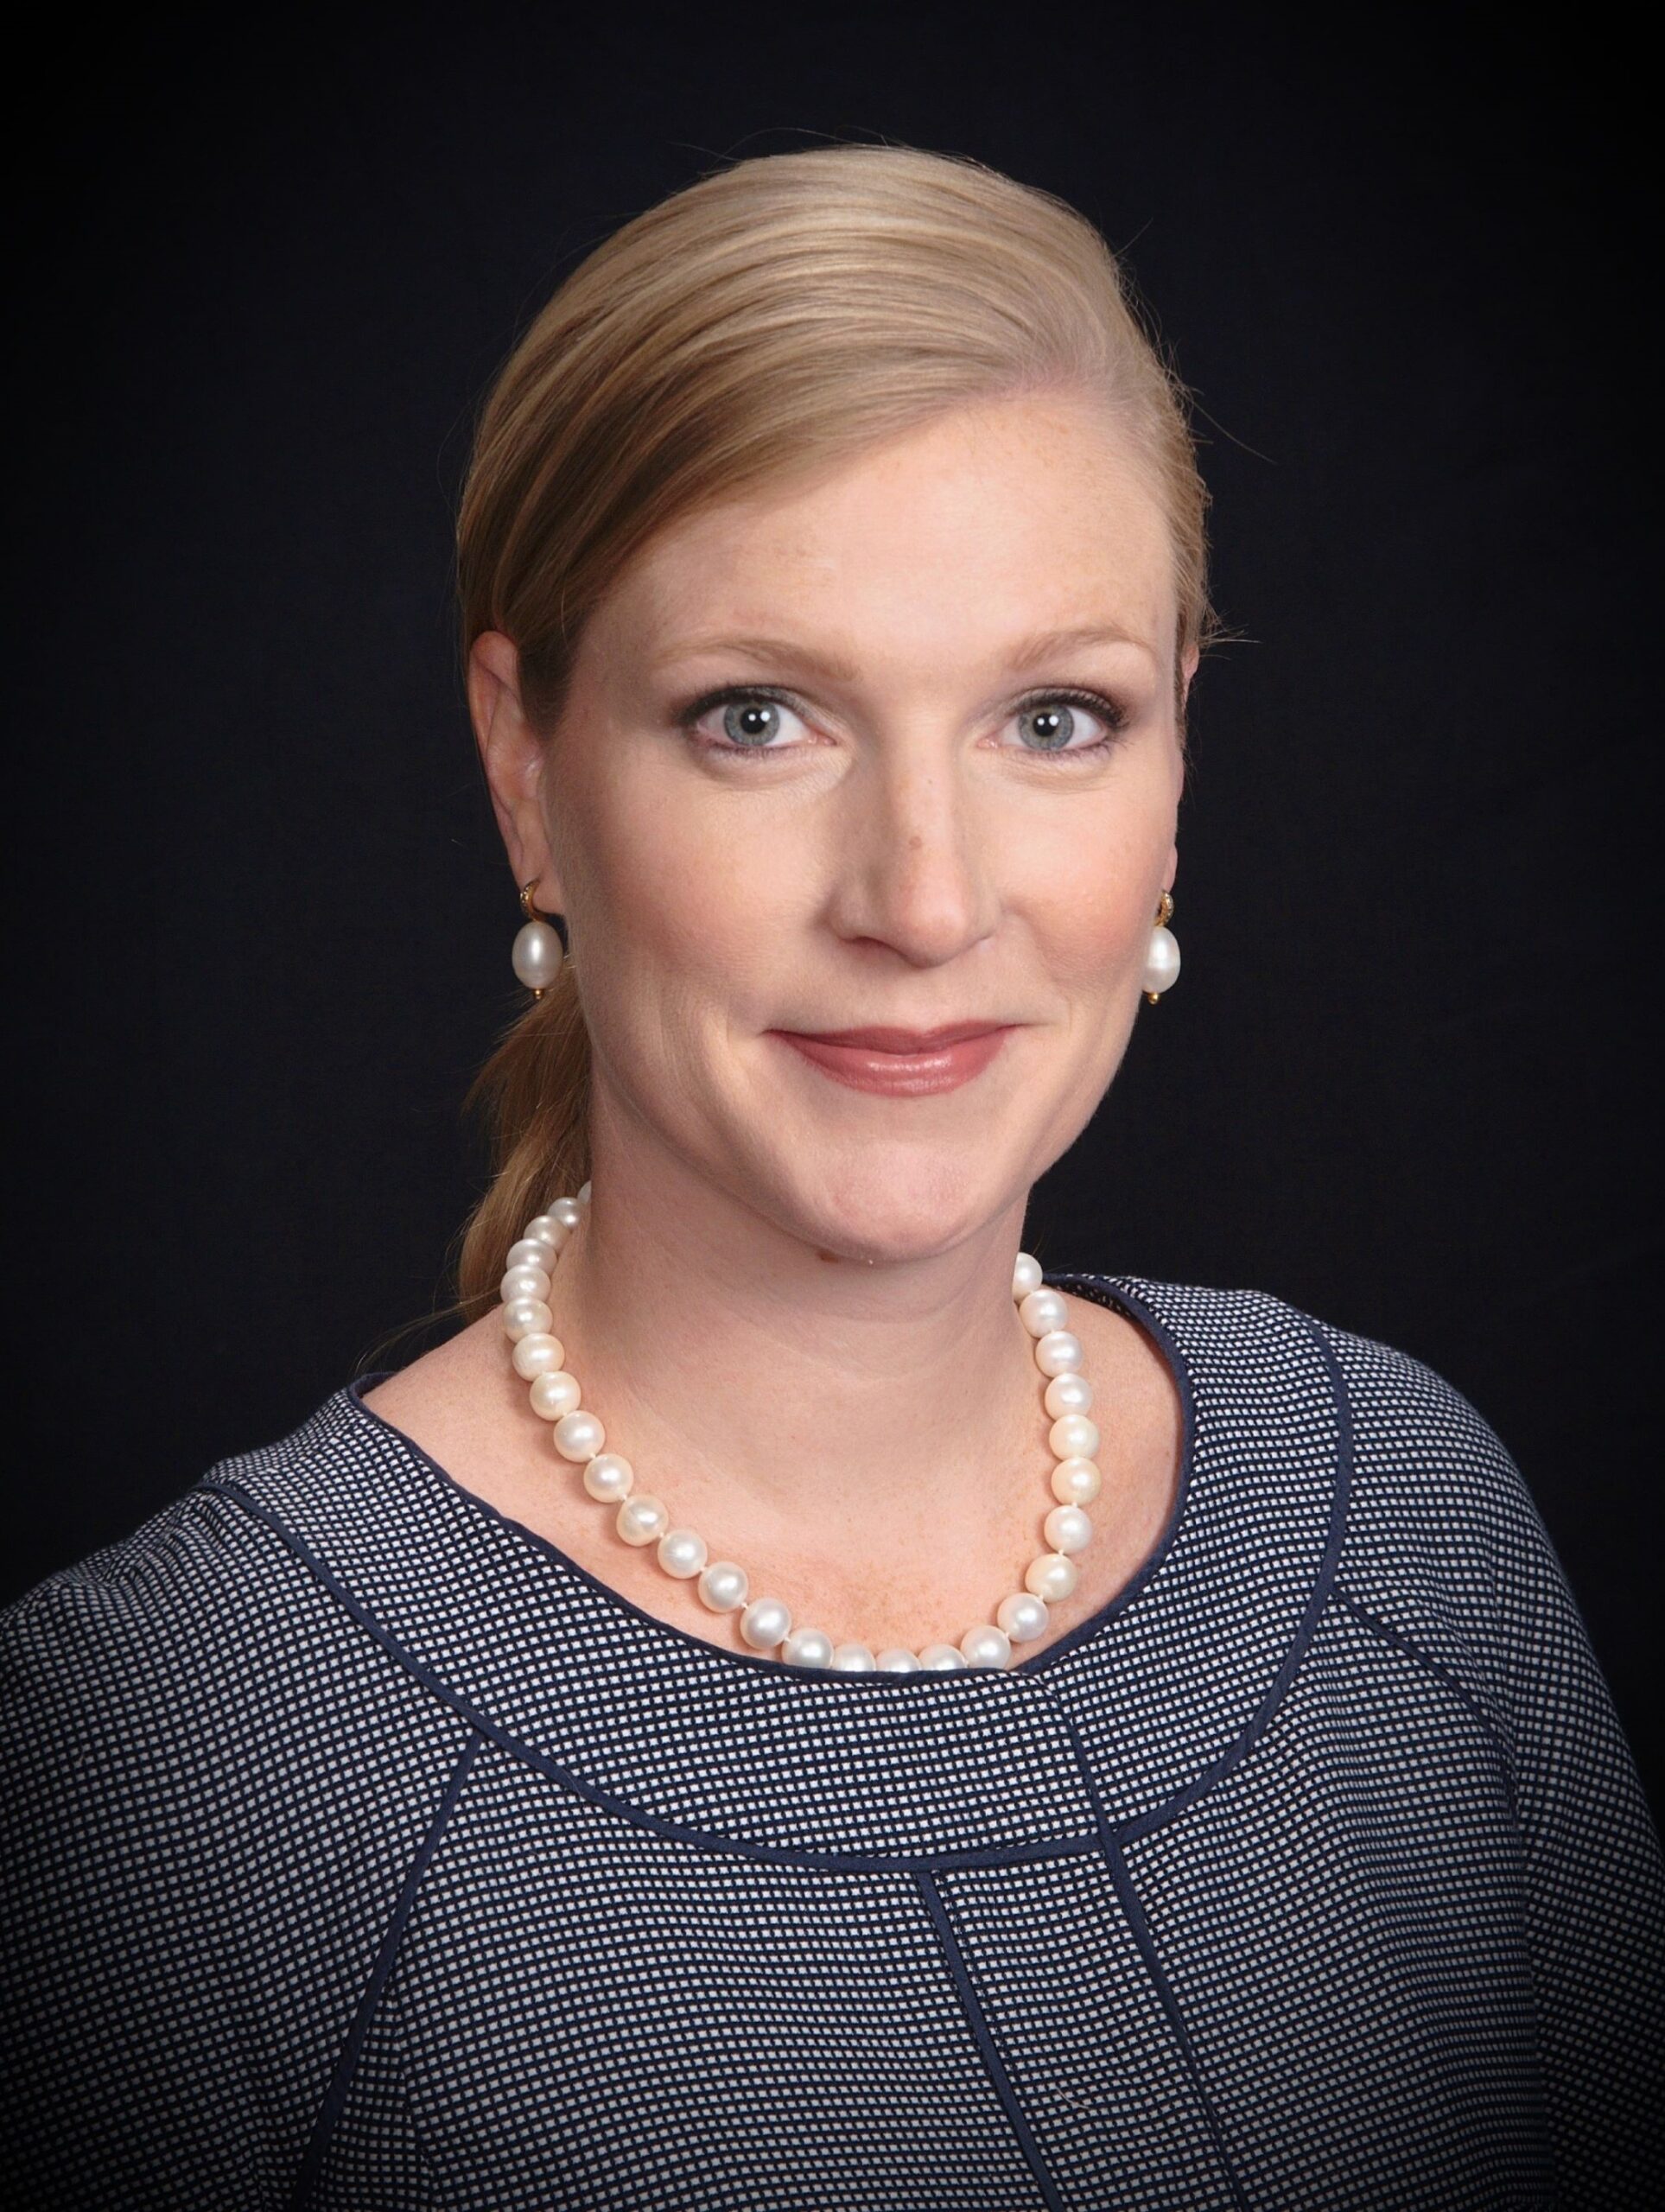 Portrait of Jessica Miley, CHOC Foundation Senior Vice President and Chief Development Officer